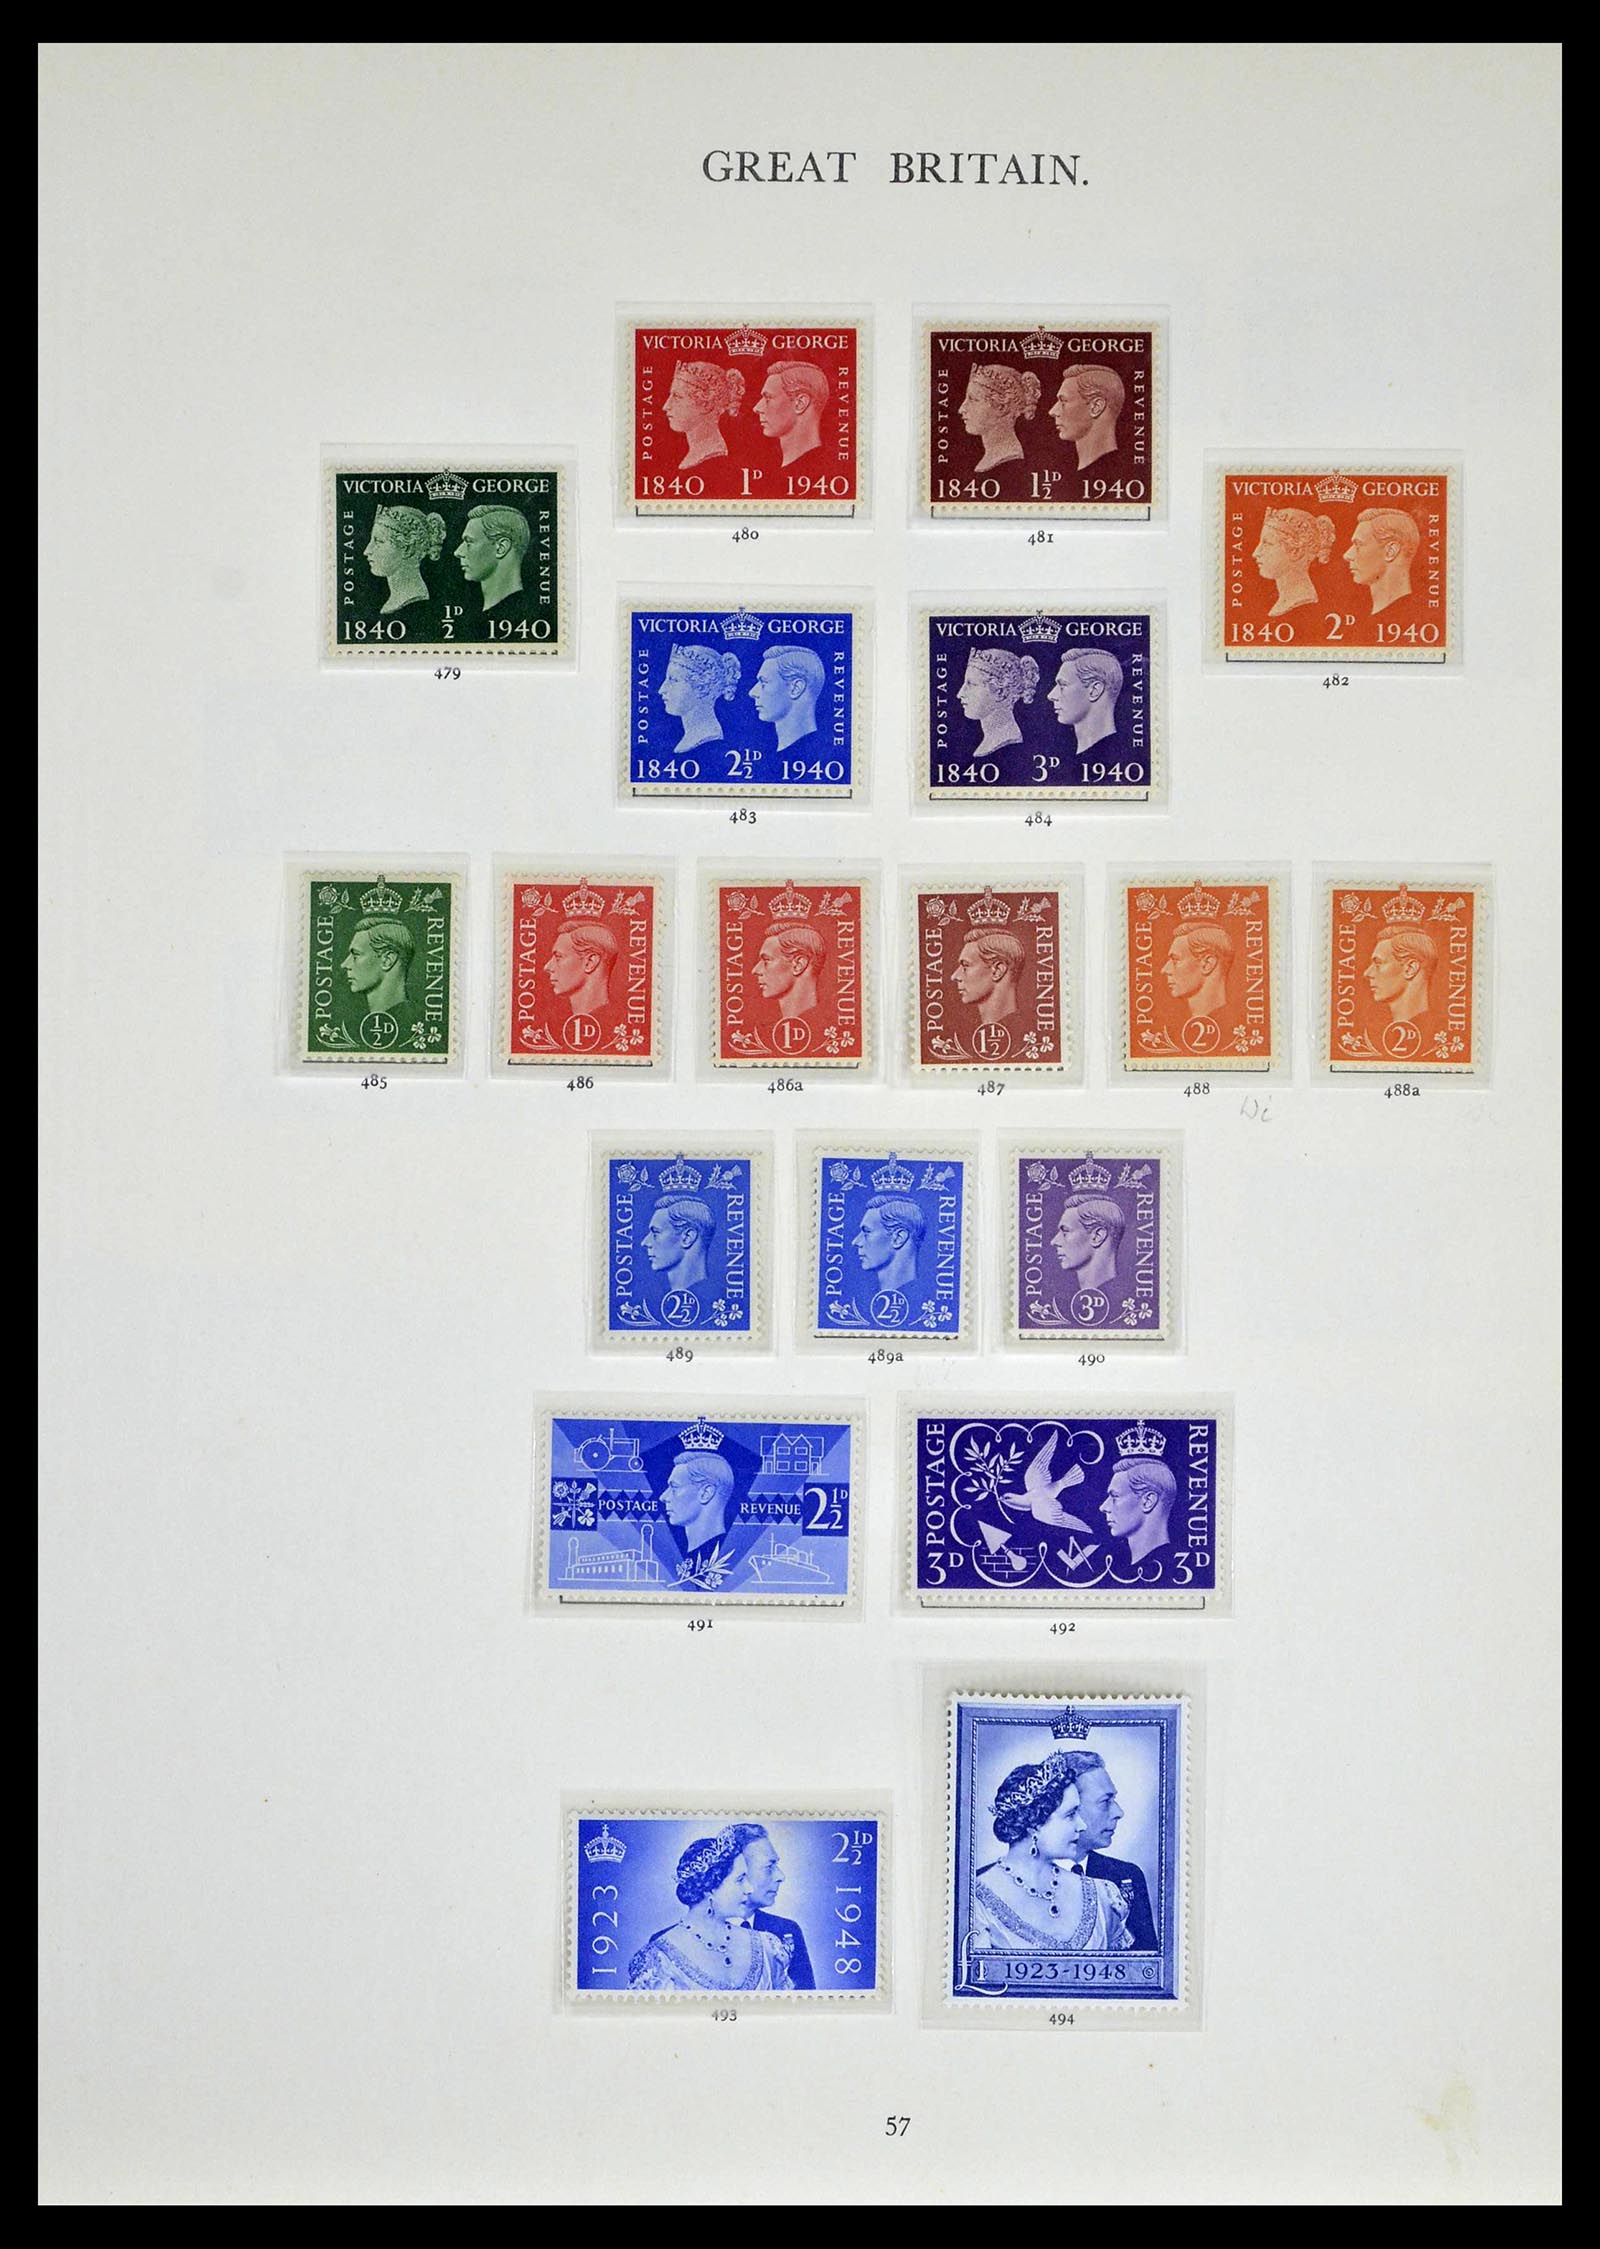 39025 0025 - Stamp collection 39025 Great Britain specialised 1840-1990.